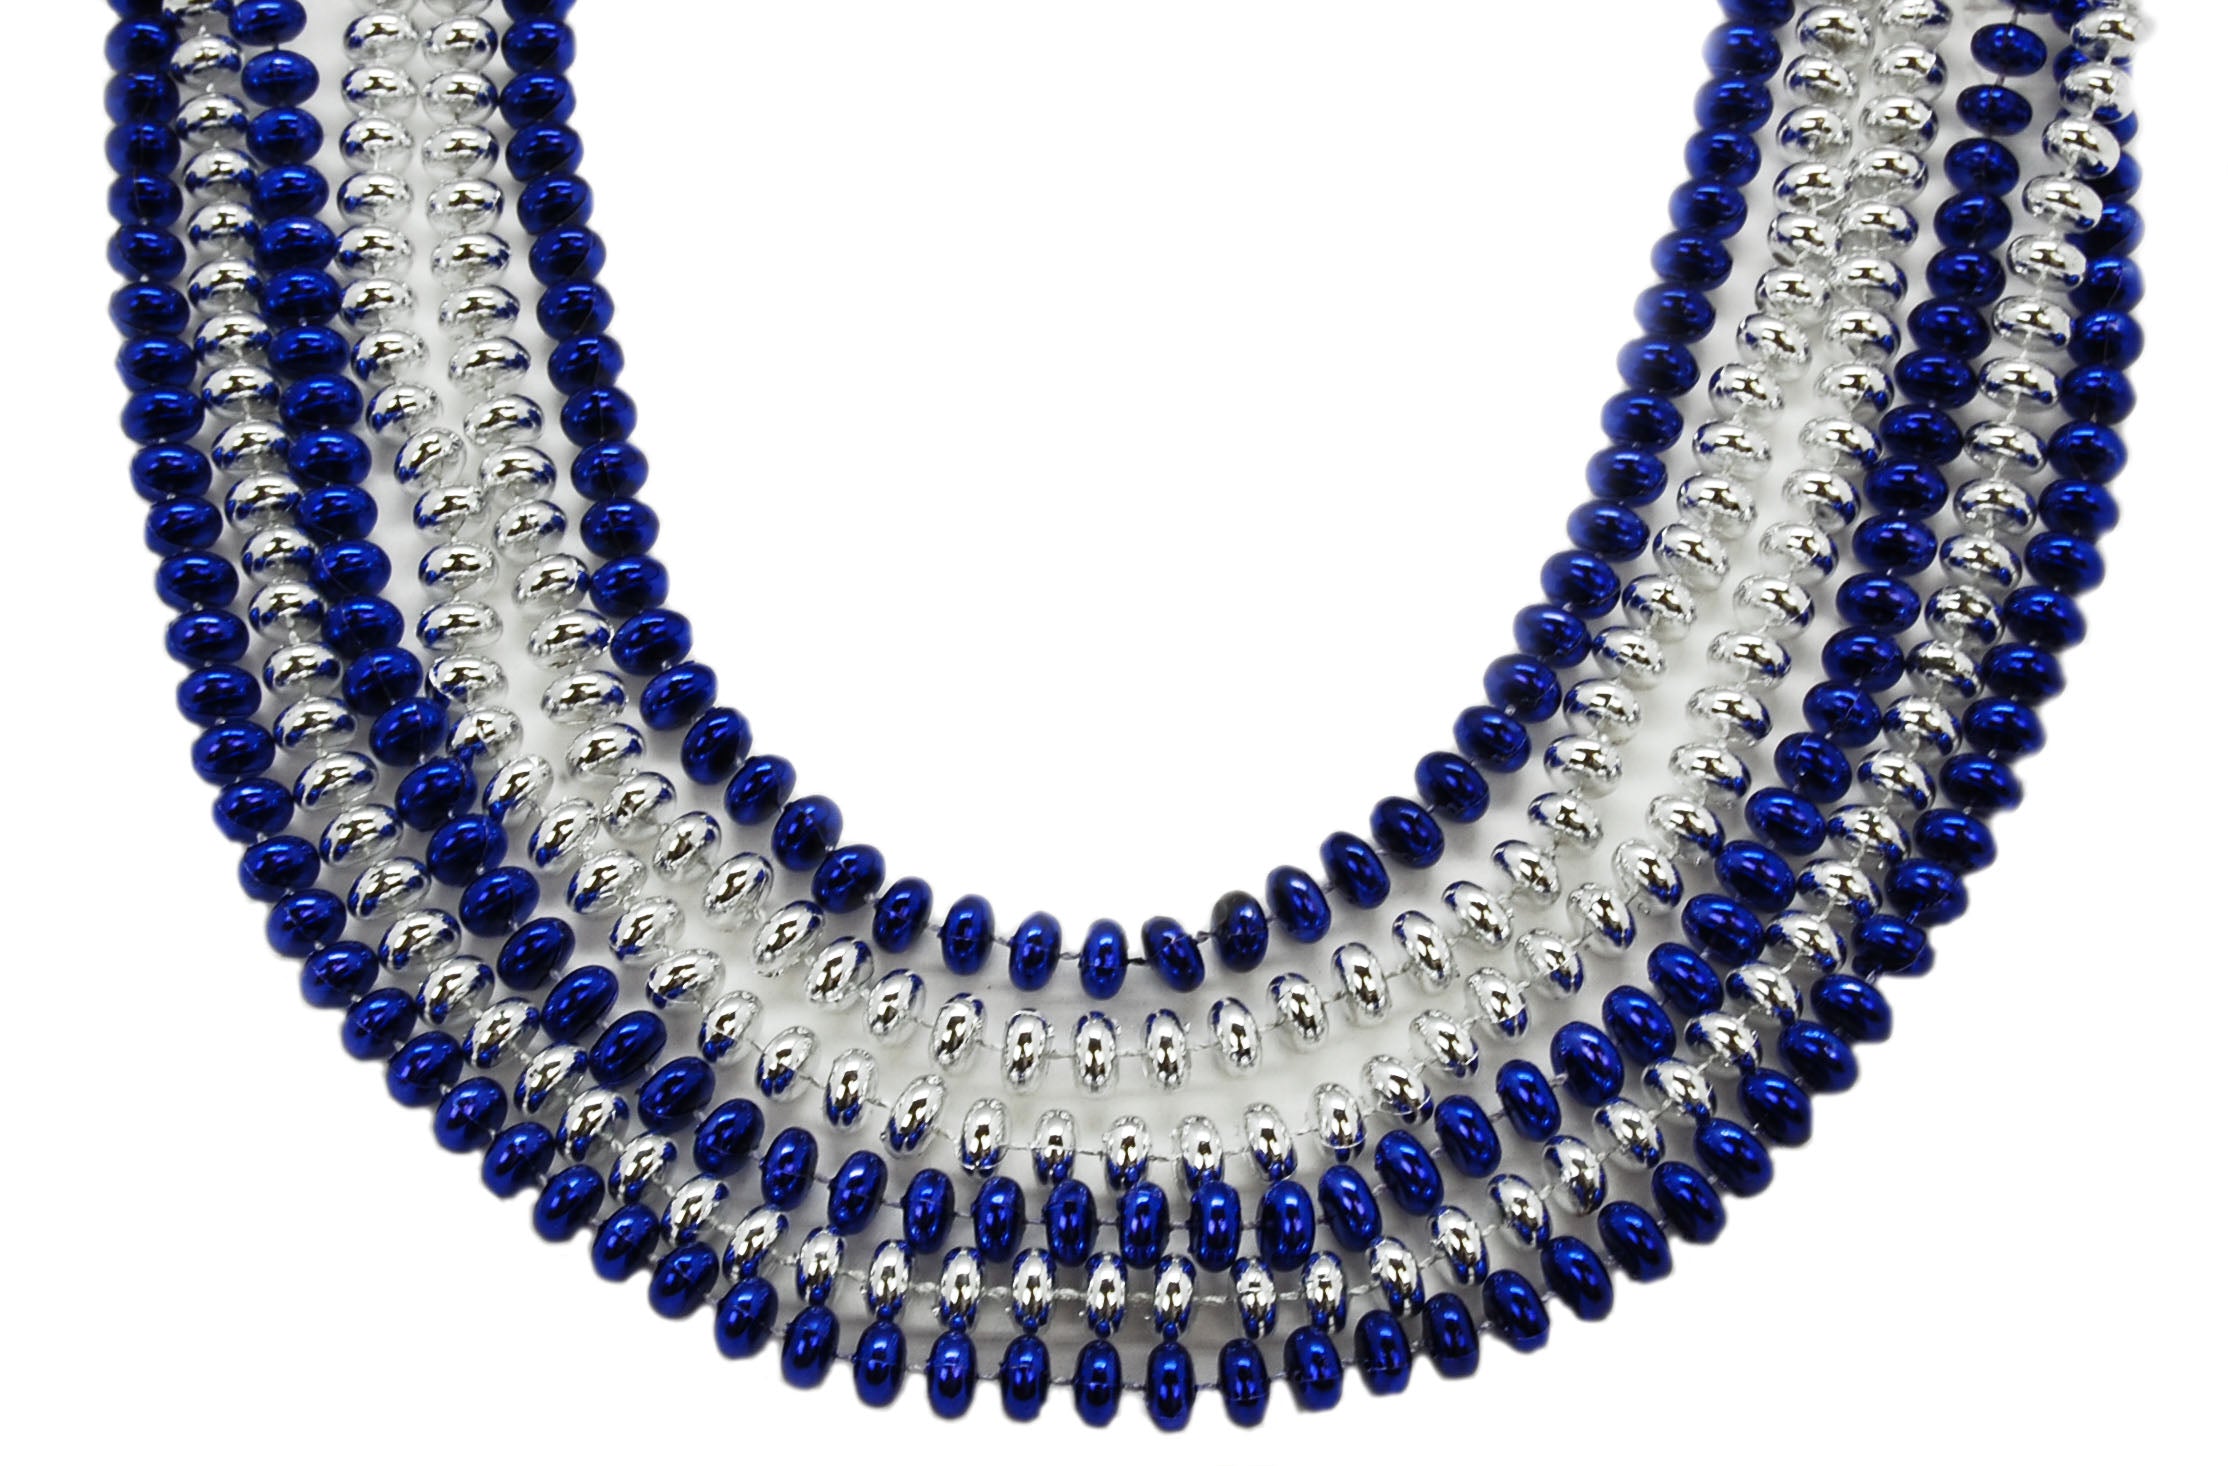 42" 10mm Abacus Beads Blue and Silver